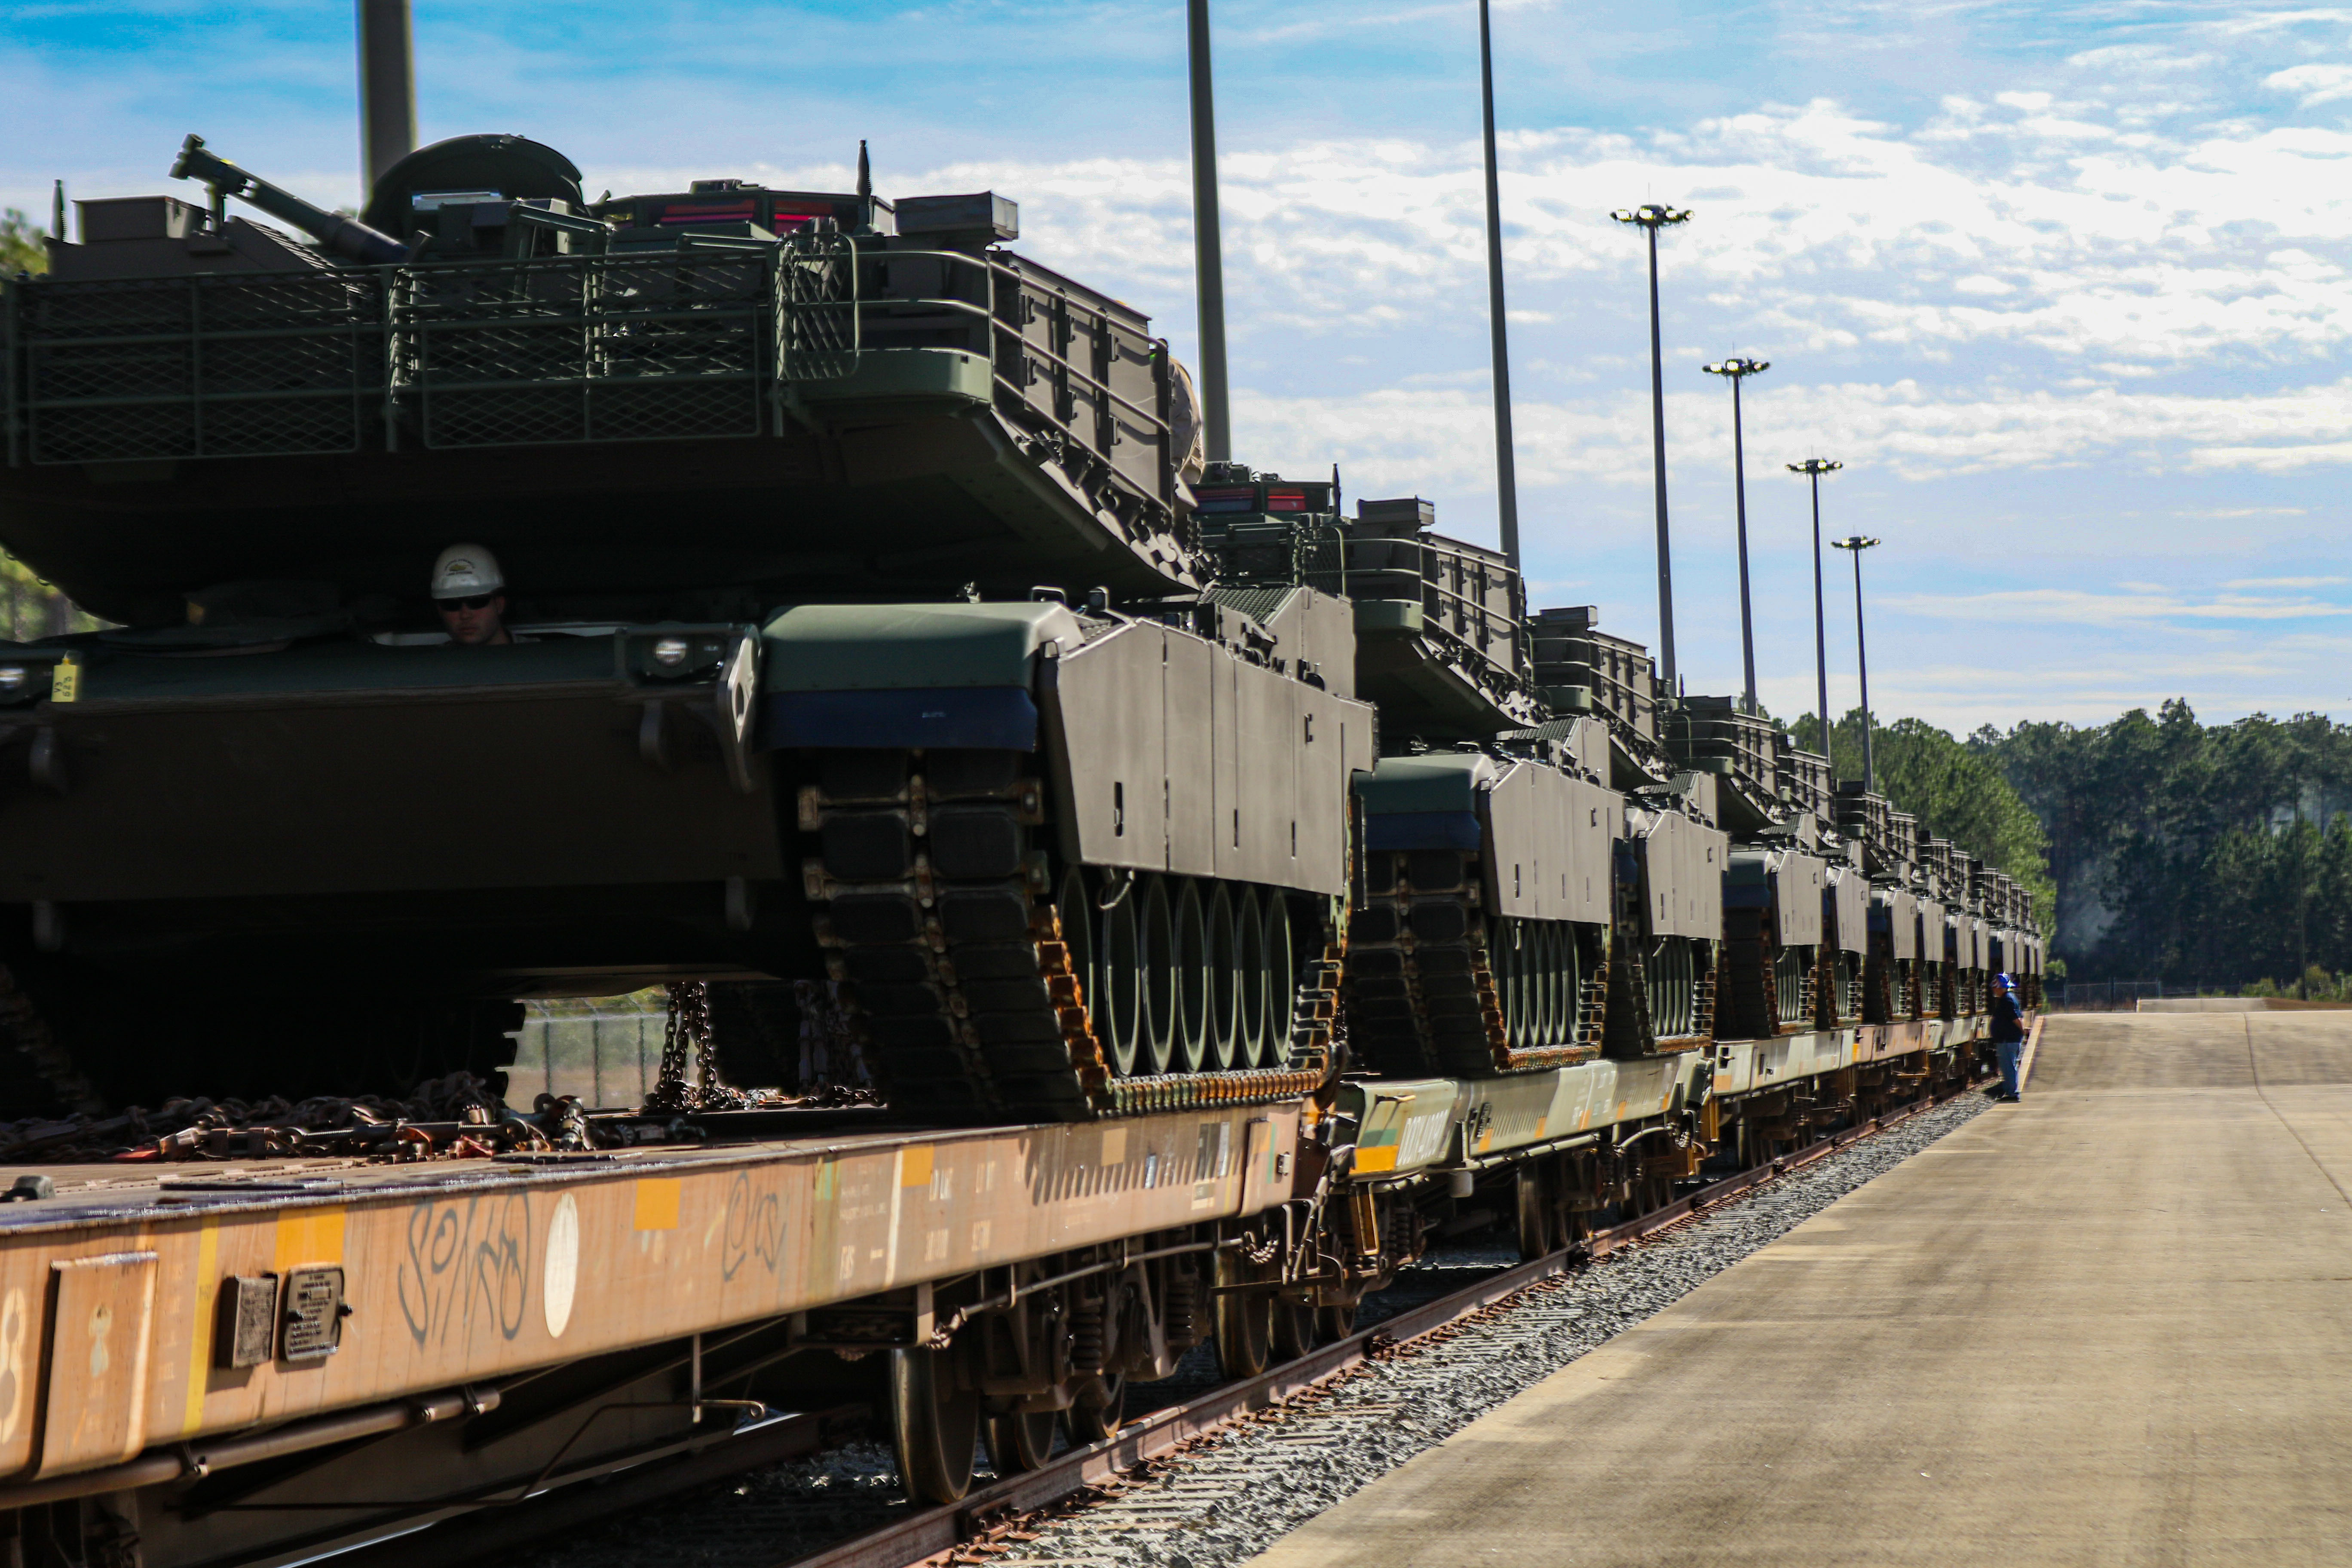 Not only M1 Abrams tanks: what will be included in the new $400 million military aid package for Ukraine from the U.S.